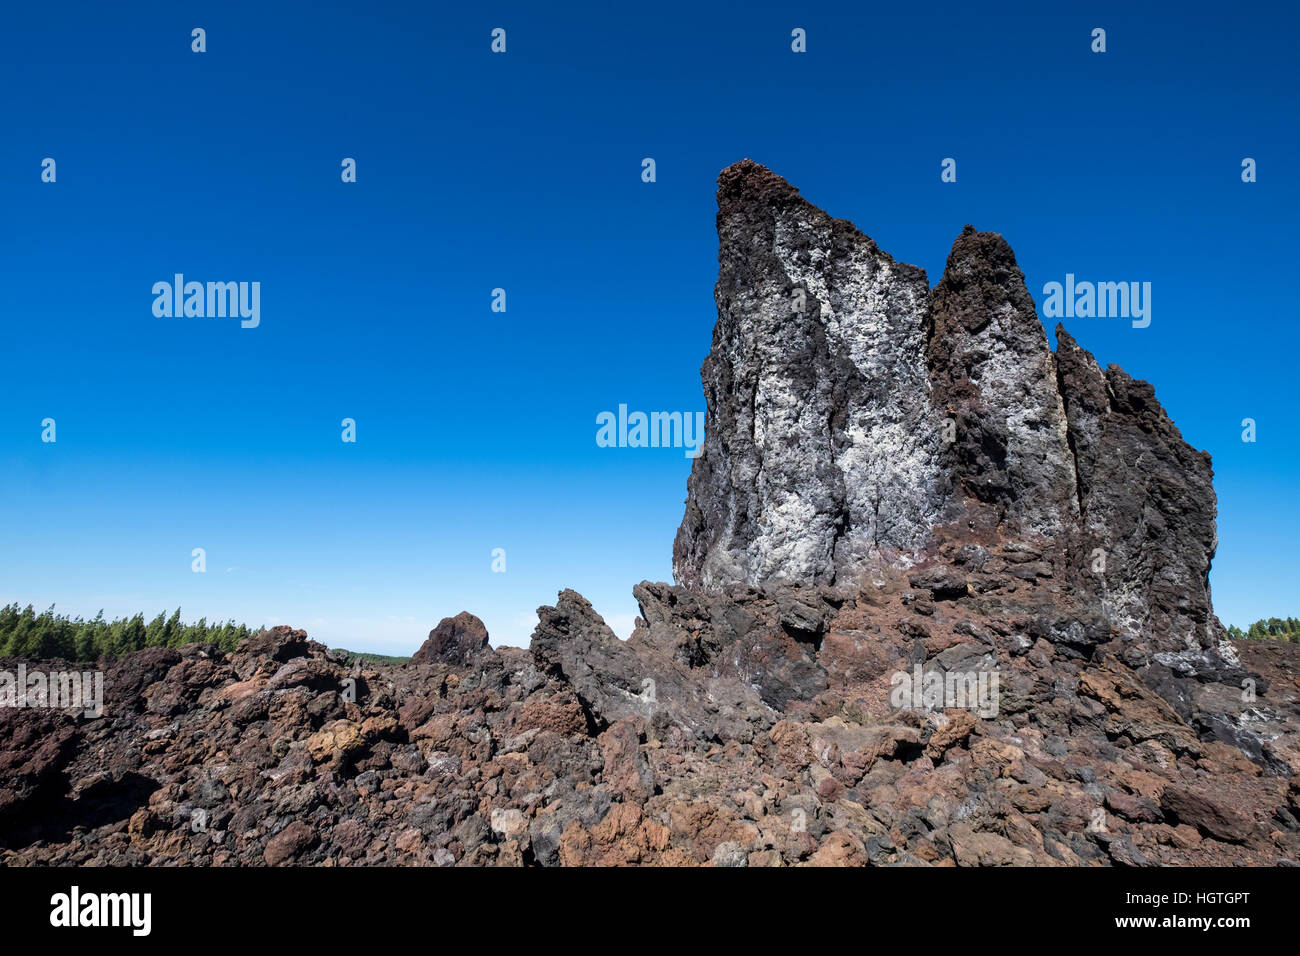 Crossing over the solidified lava flow from Chinyero volcano on Teide, Tenerife, Canary Islands, Spain Stock Photo